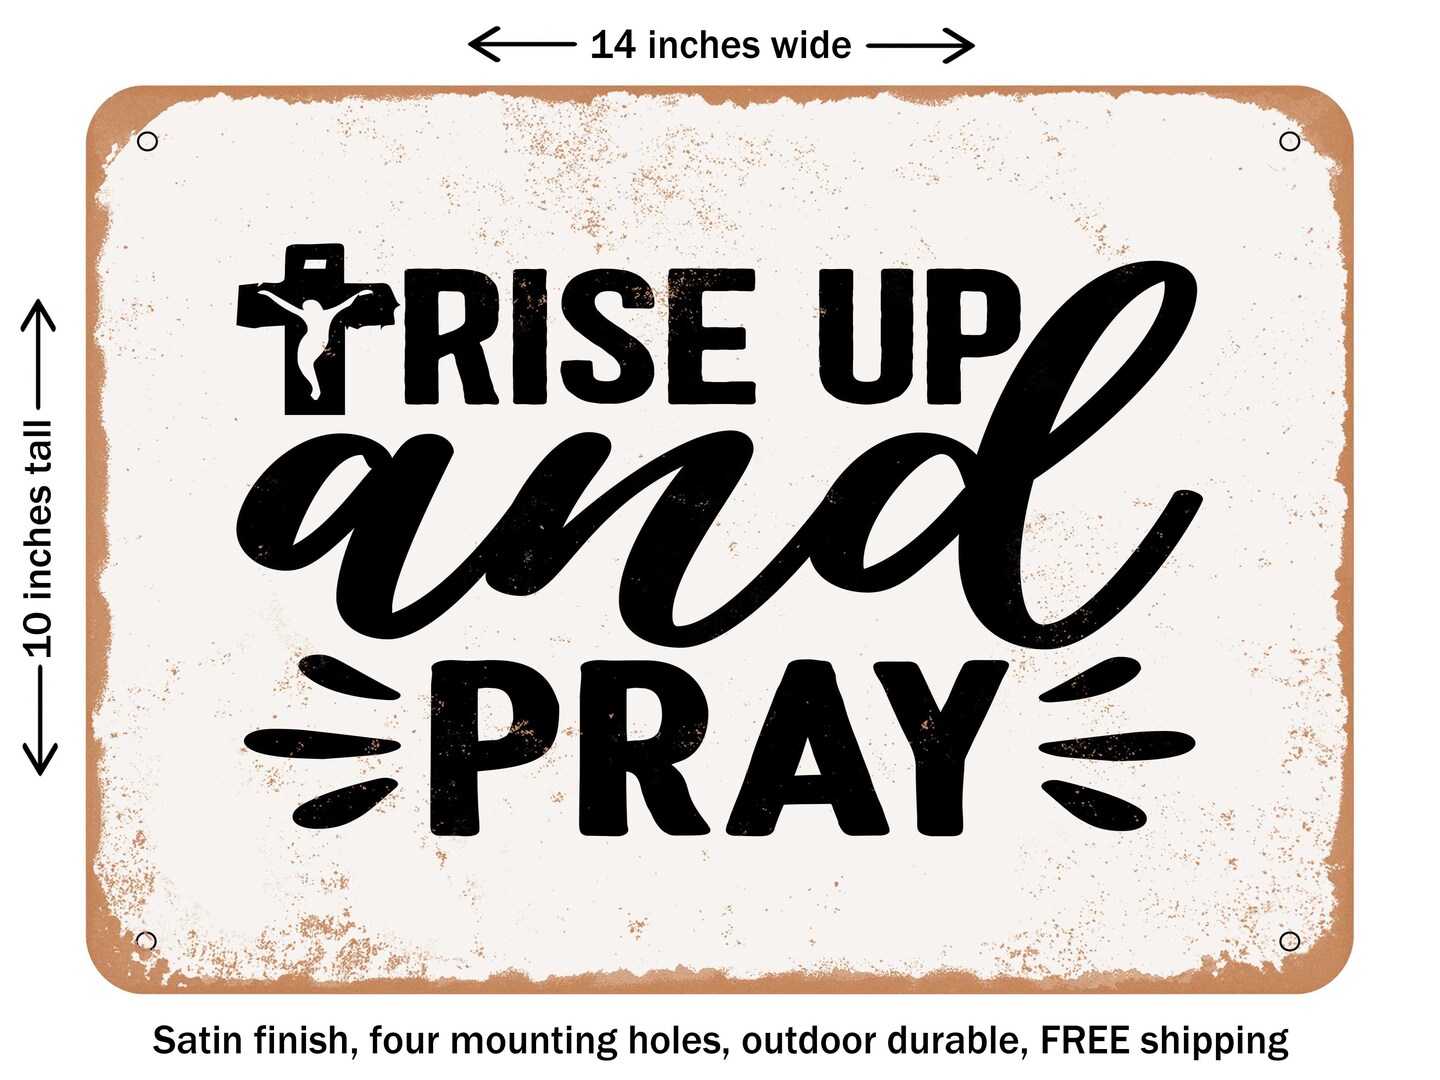 DECORATIVE METAL SIGN - Rise Up and Pray - Vintage Rusty Look